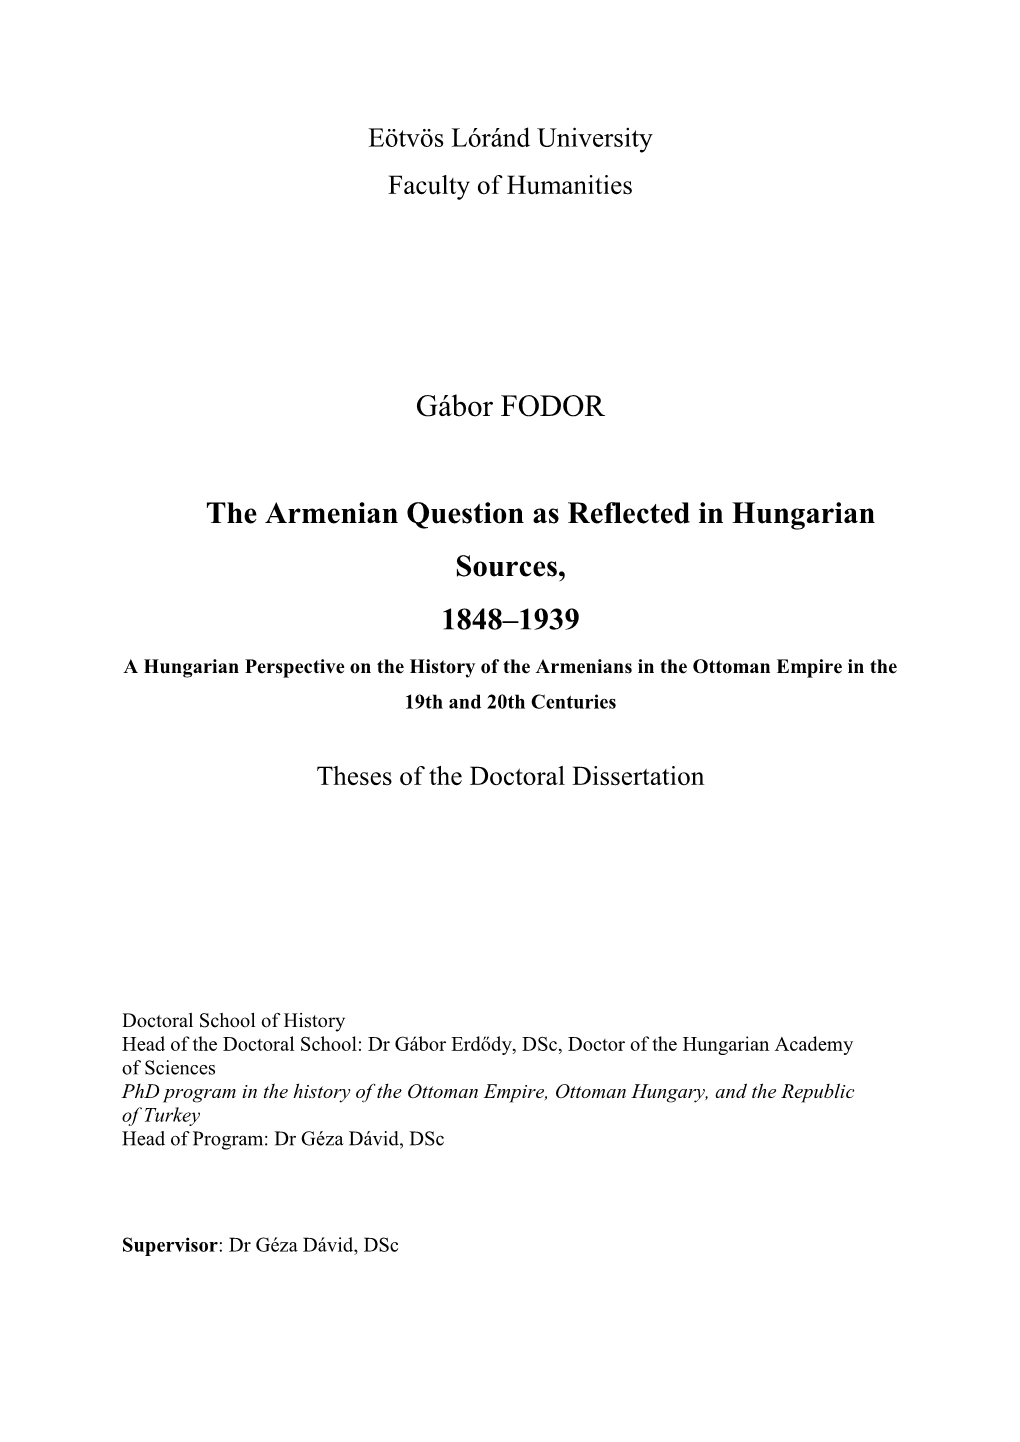 Gábor FODOR the Armenian Question As Reflected in Hungarian